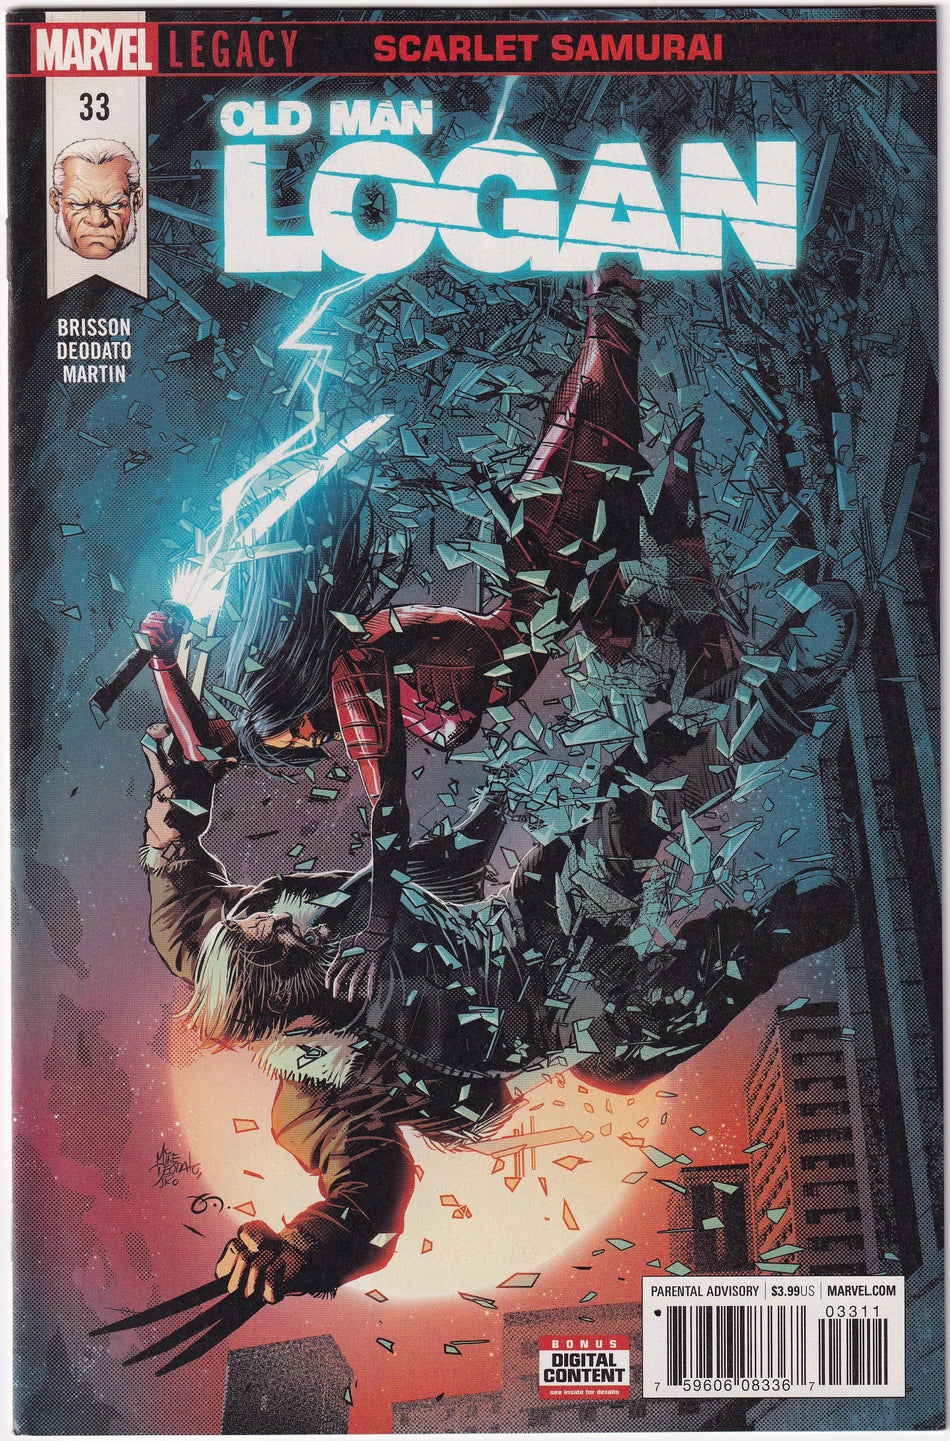 Photo of Old Man Logan V2 (18) 33 Ed Brisson, Mike Deodato Jr. Comic sold by Stronghold Collectibles